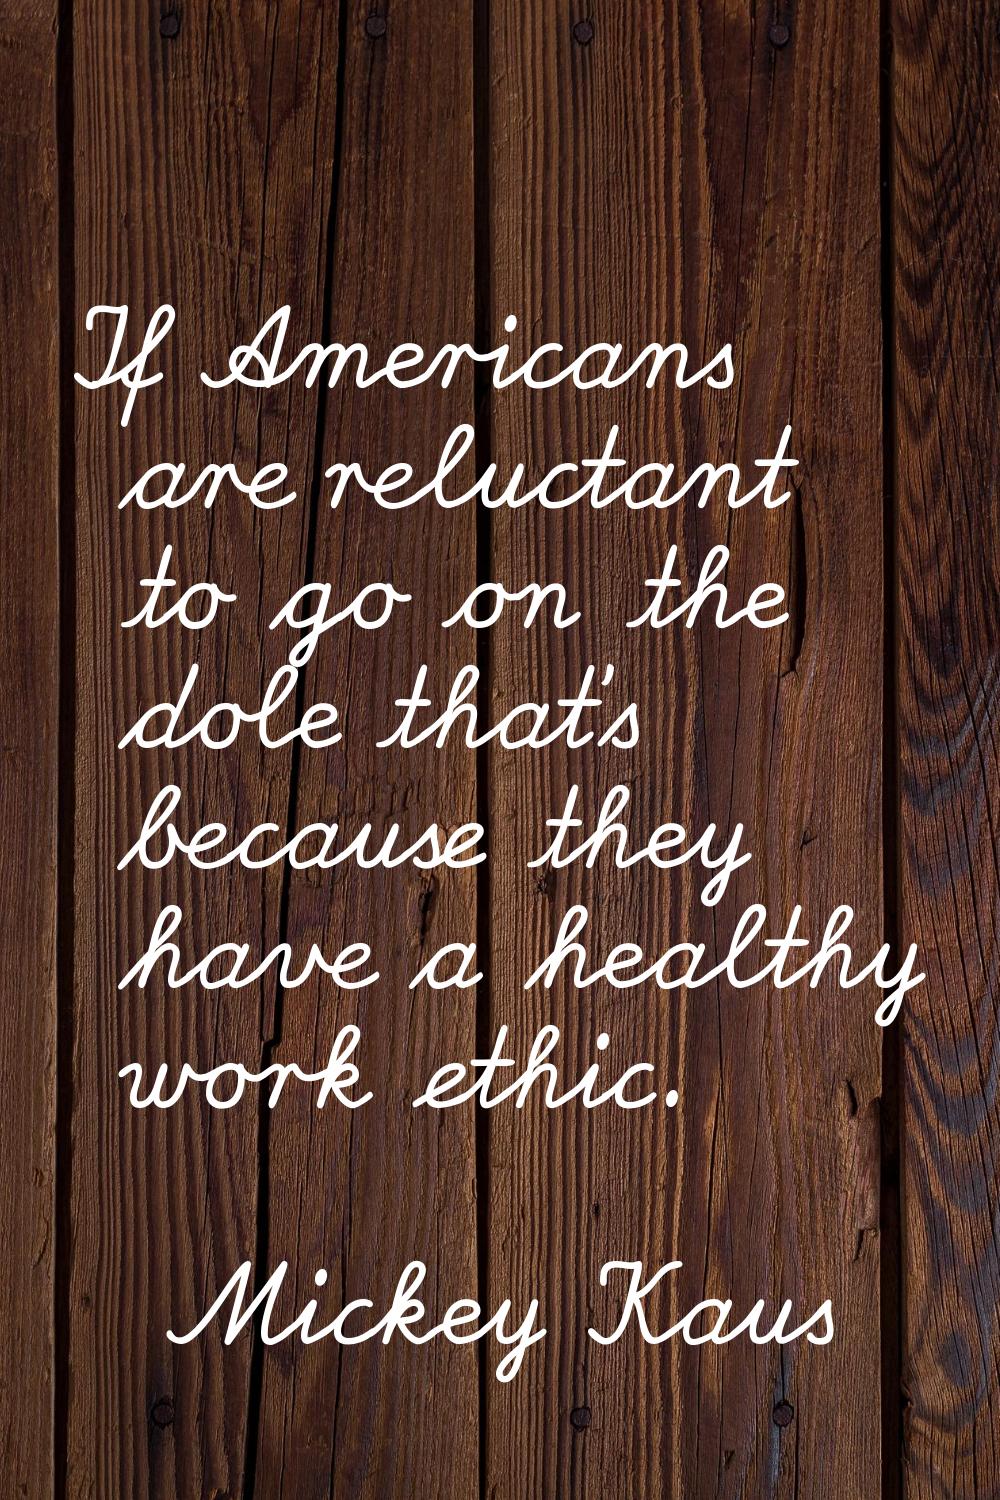 If Americans are reluctant to go on the dole that's because they have a healthy work ethic.